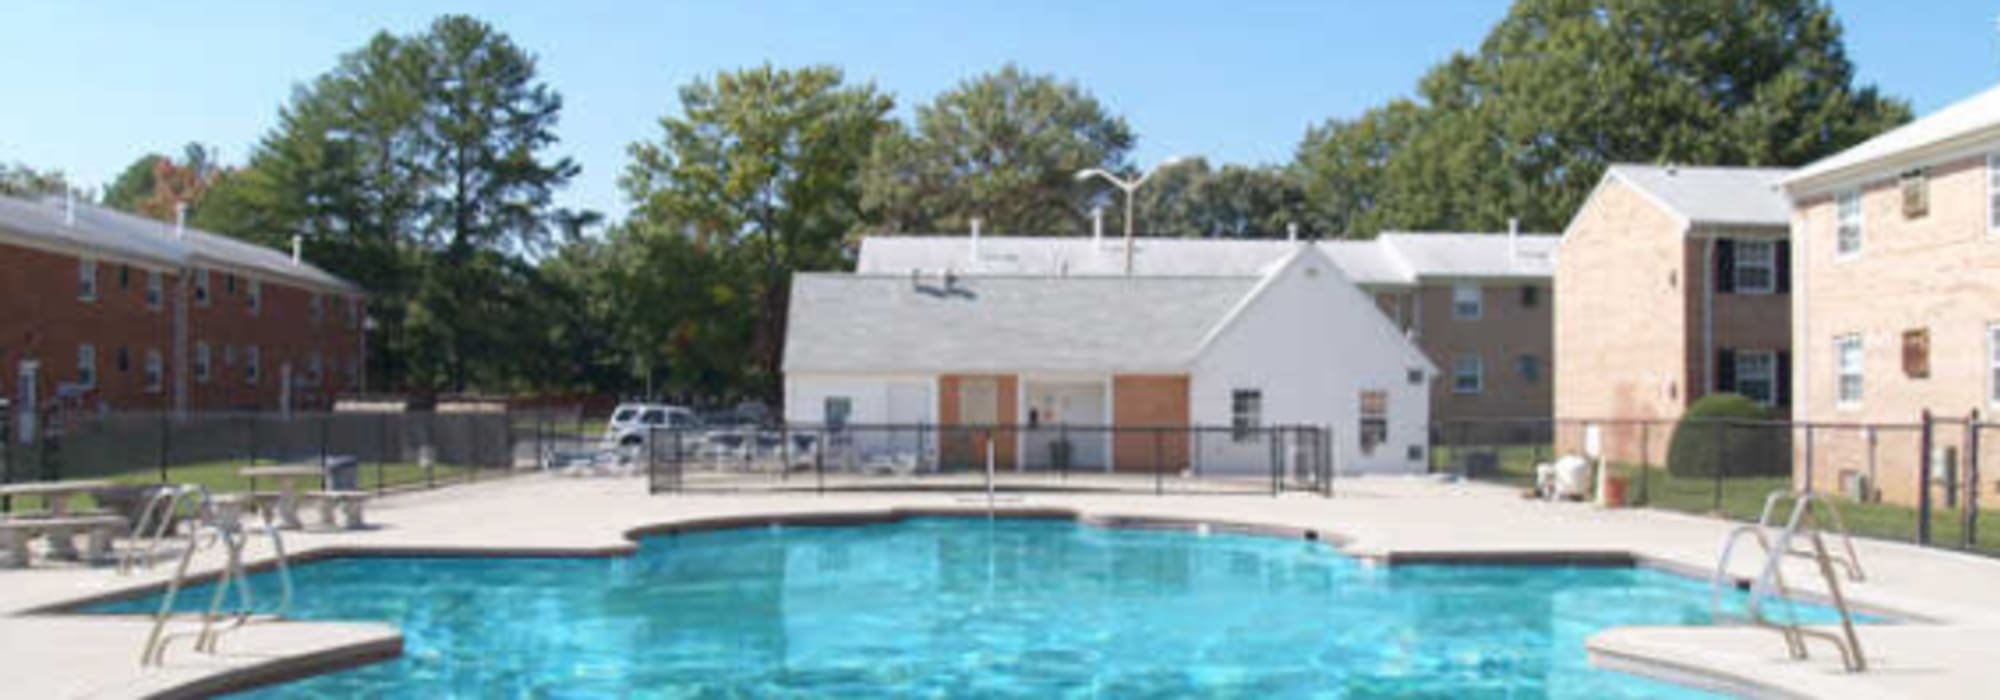 Community pool area at Morningside Apartments in Richmond, Virginia